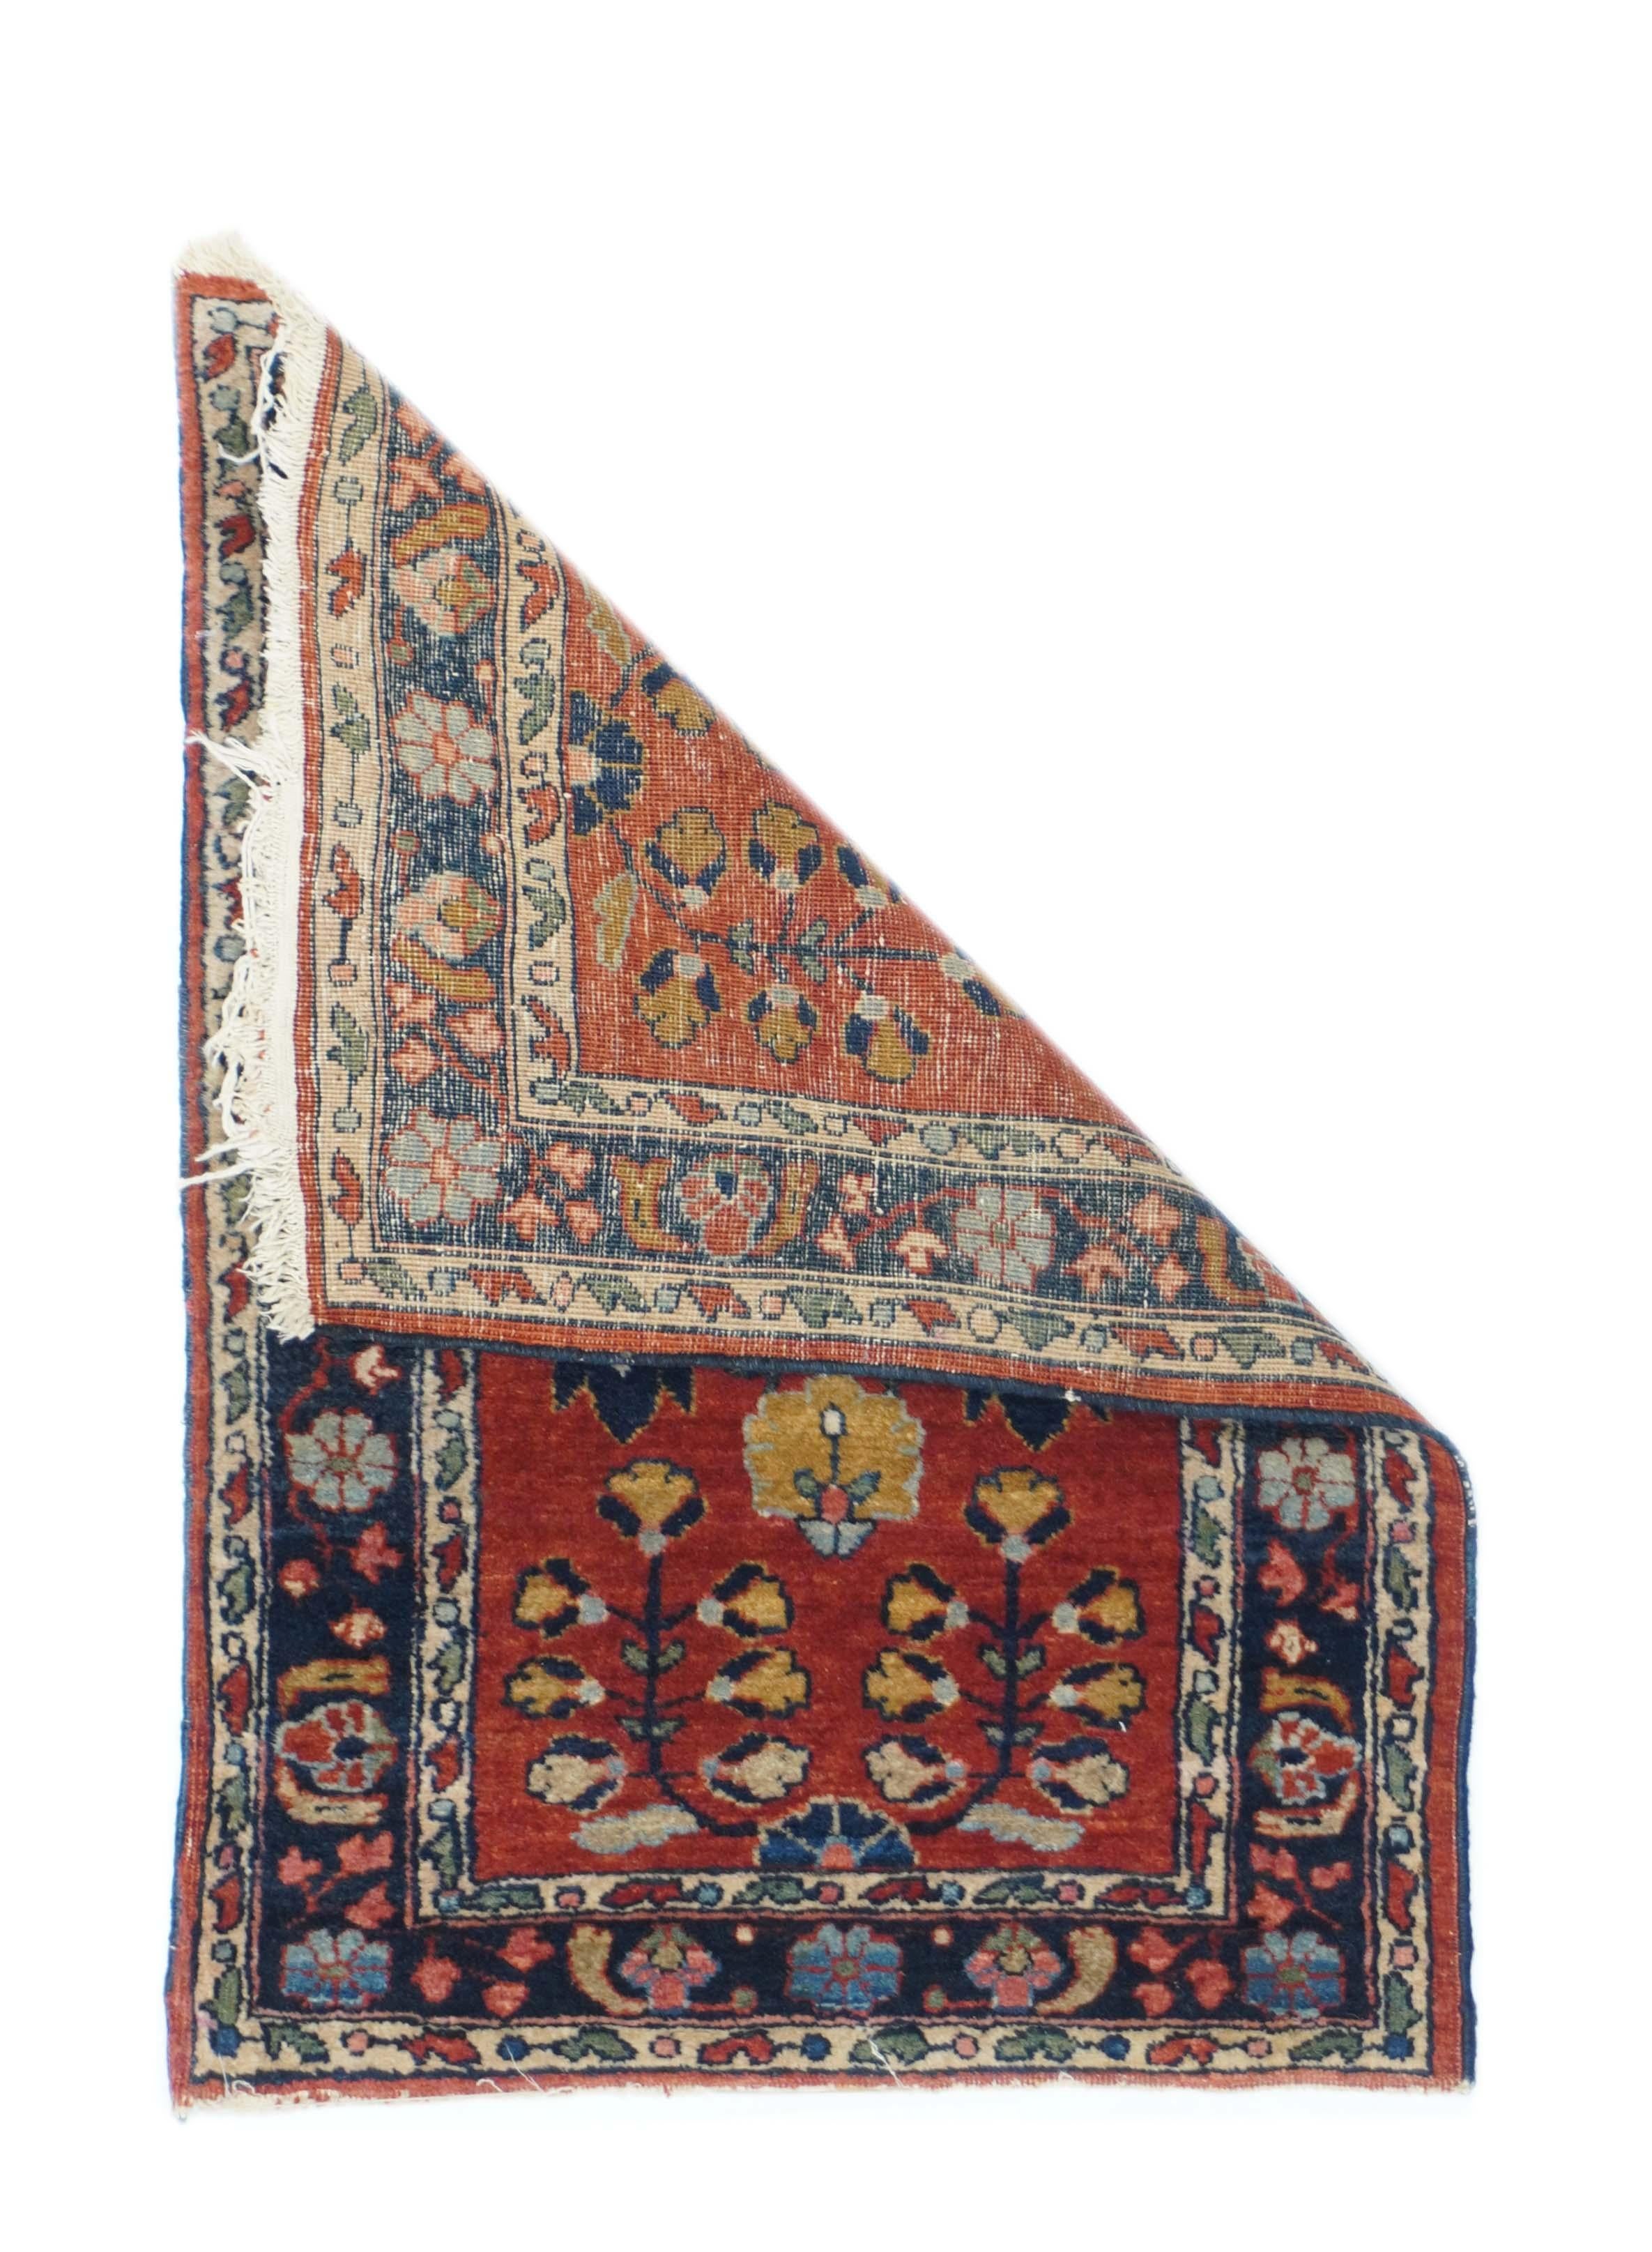 Antique Sarouk Rug 1'8'' x 2'6''. A central petal rosette develops palmettes while four tall complete upright stems grow bellflowers, all on the scarlet ground. Navy border with rosettes and little sickle leaves. Nice green and abrashed light blue.